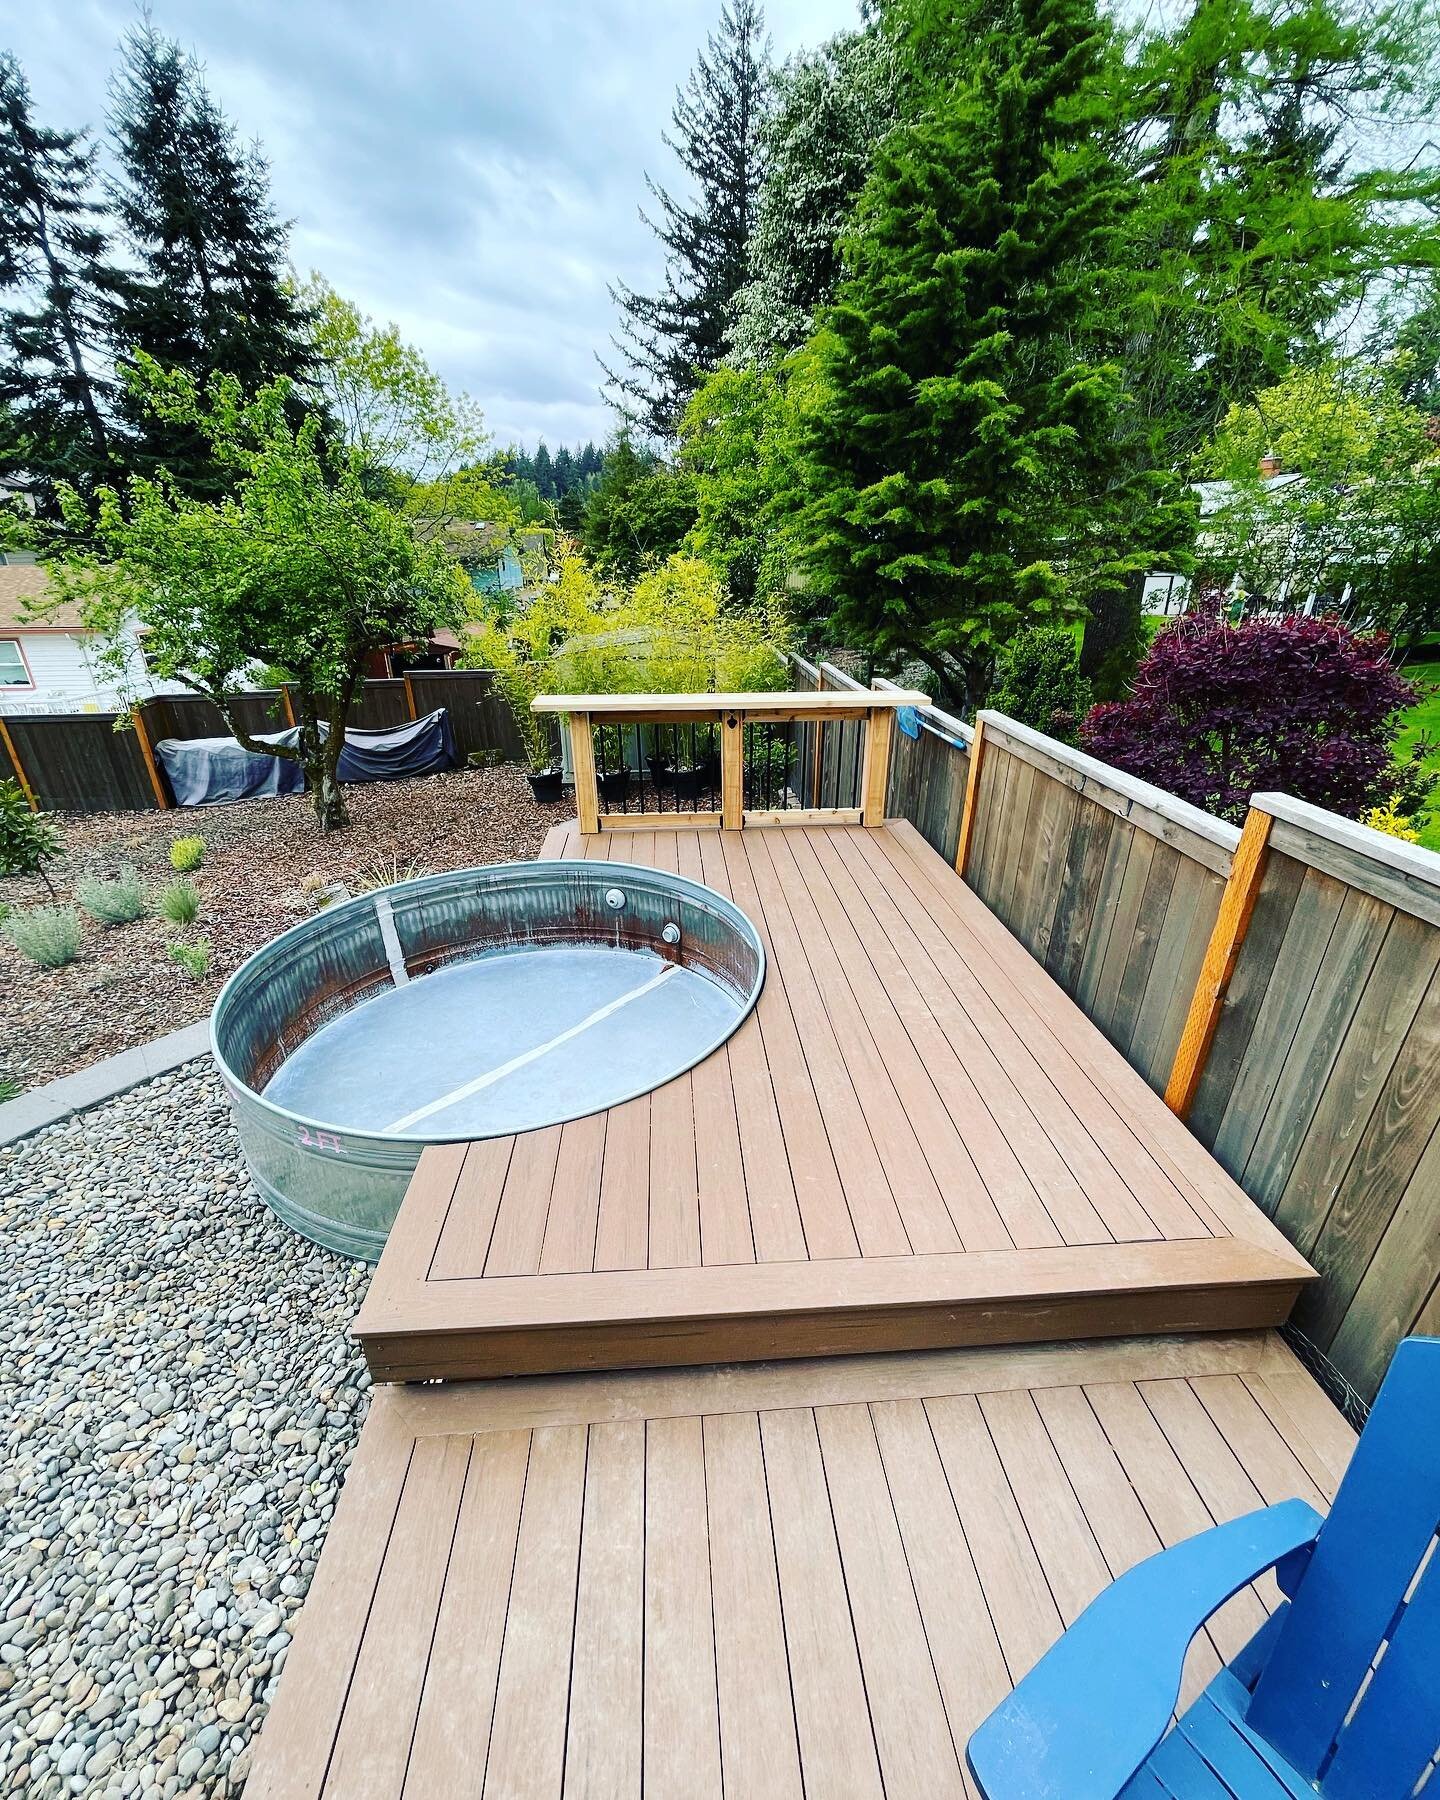 These happy clients are ready to #beattheheat  this summer with their brand new #stocktankpool deck! Featuring @timbertech terrain brown oak from @parrlumberco and a custom #cedar #bartop.